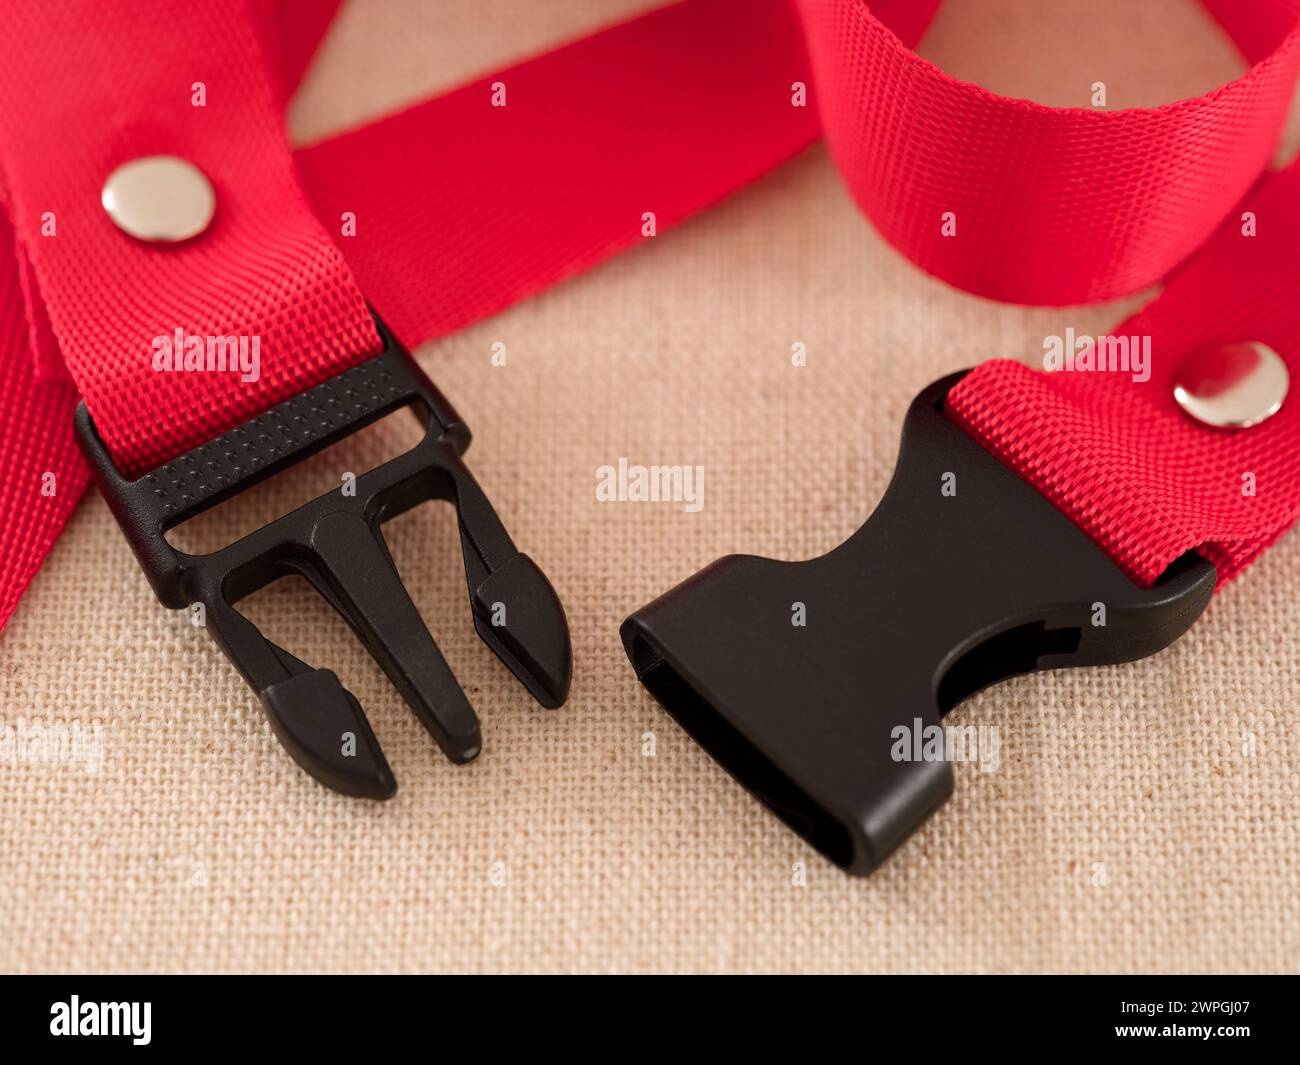 Two ends of a black contoured side release plastic buckle with red nylon belt on a beige textile background Stock Photo